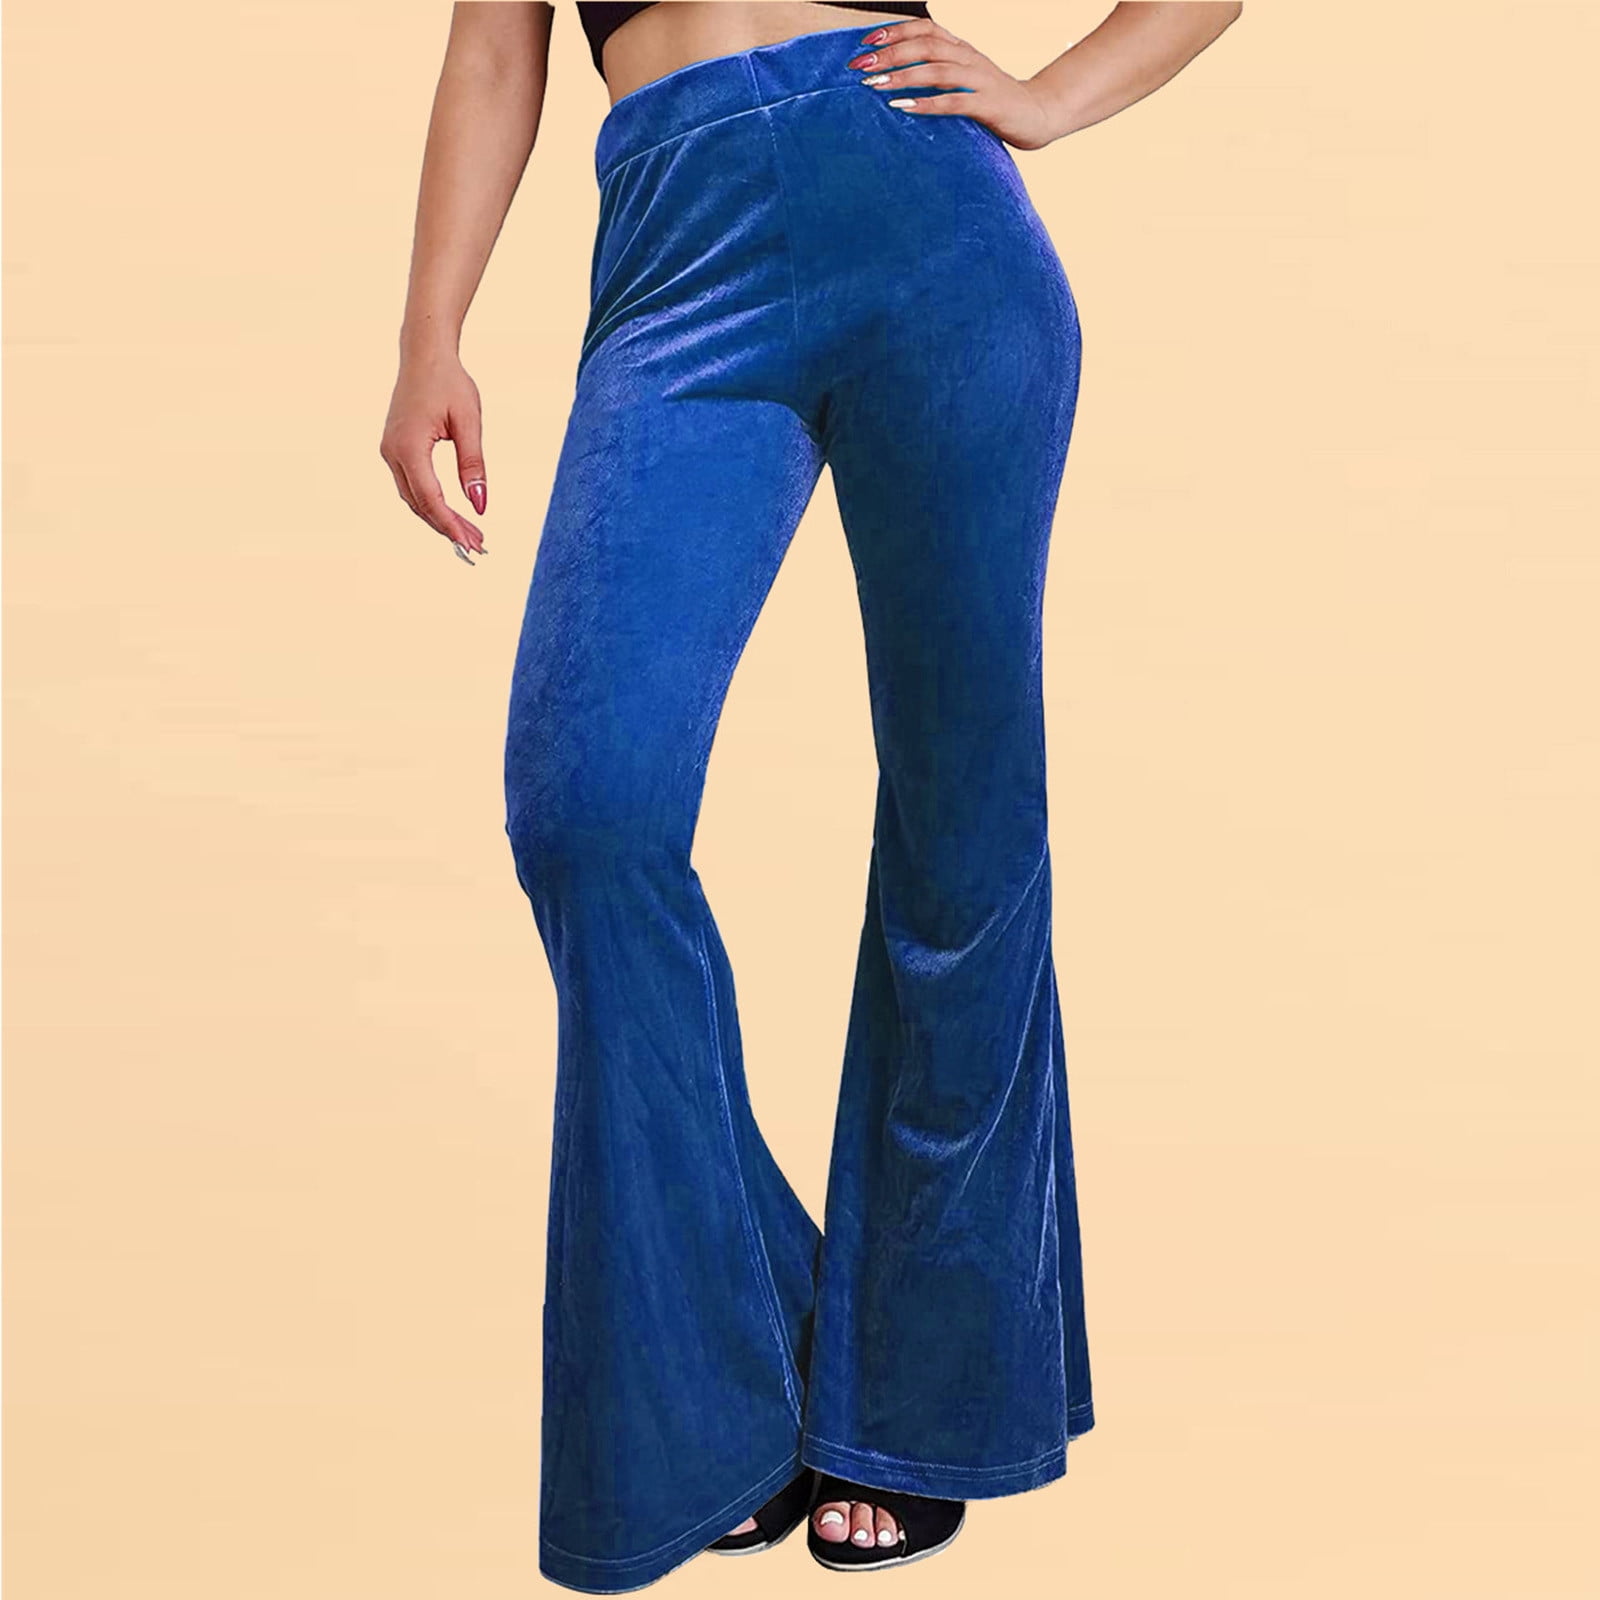 YWDJ Bell Bottom Pants for Women 70s High Waist High Rise Flared Elastic  Waist Casual Stretchy Long Pant Fashion Comfortable Solid Color Leisure